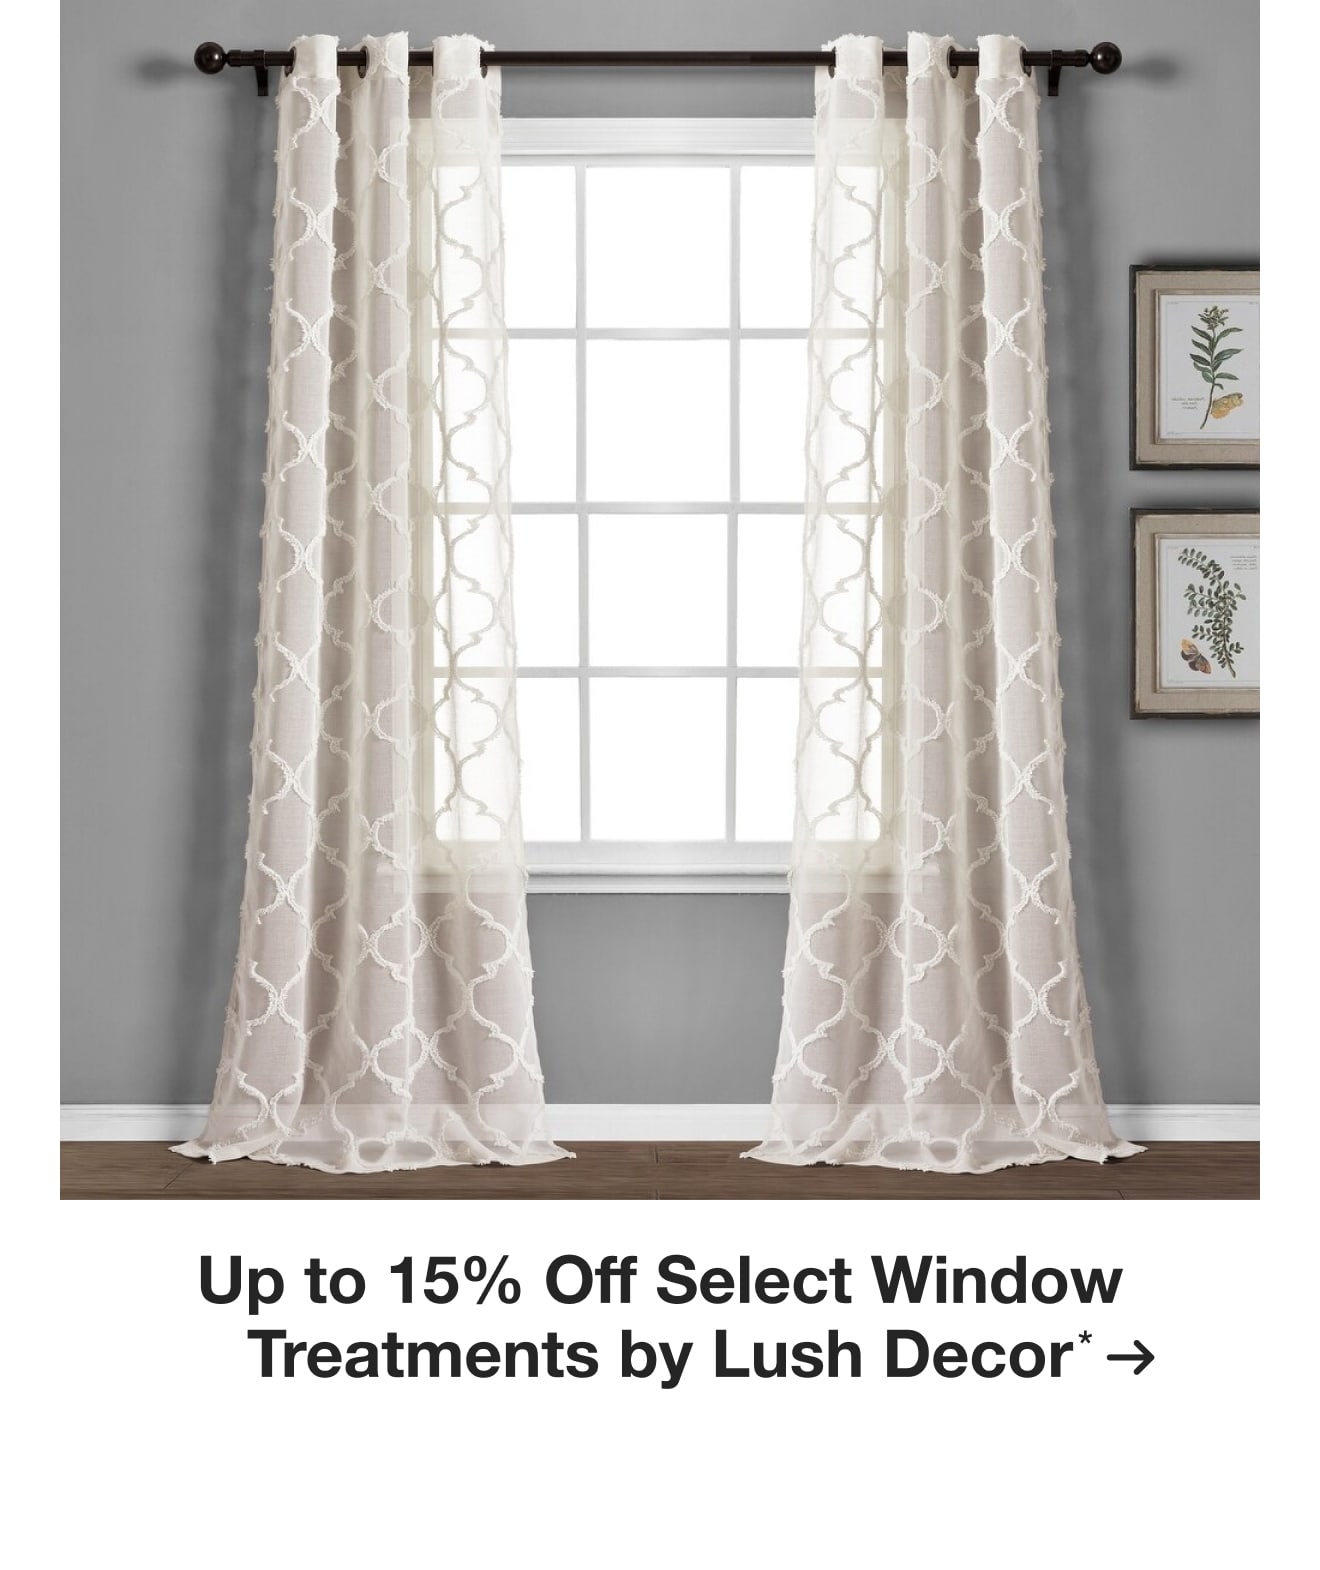 Up to 15% Off Select Window Treatments by Lush Decor*